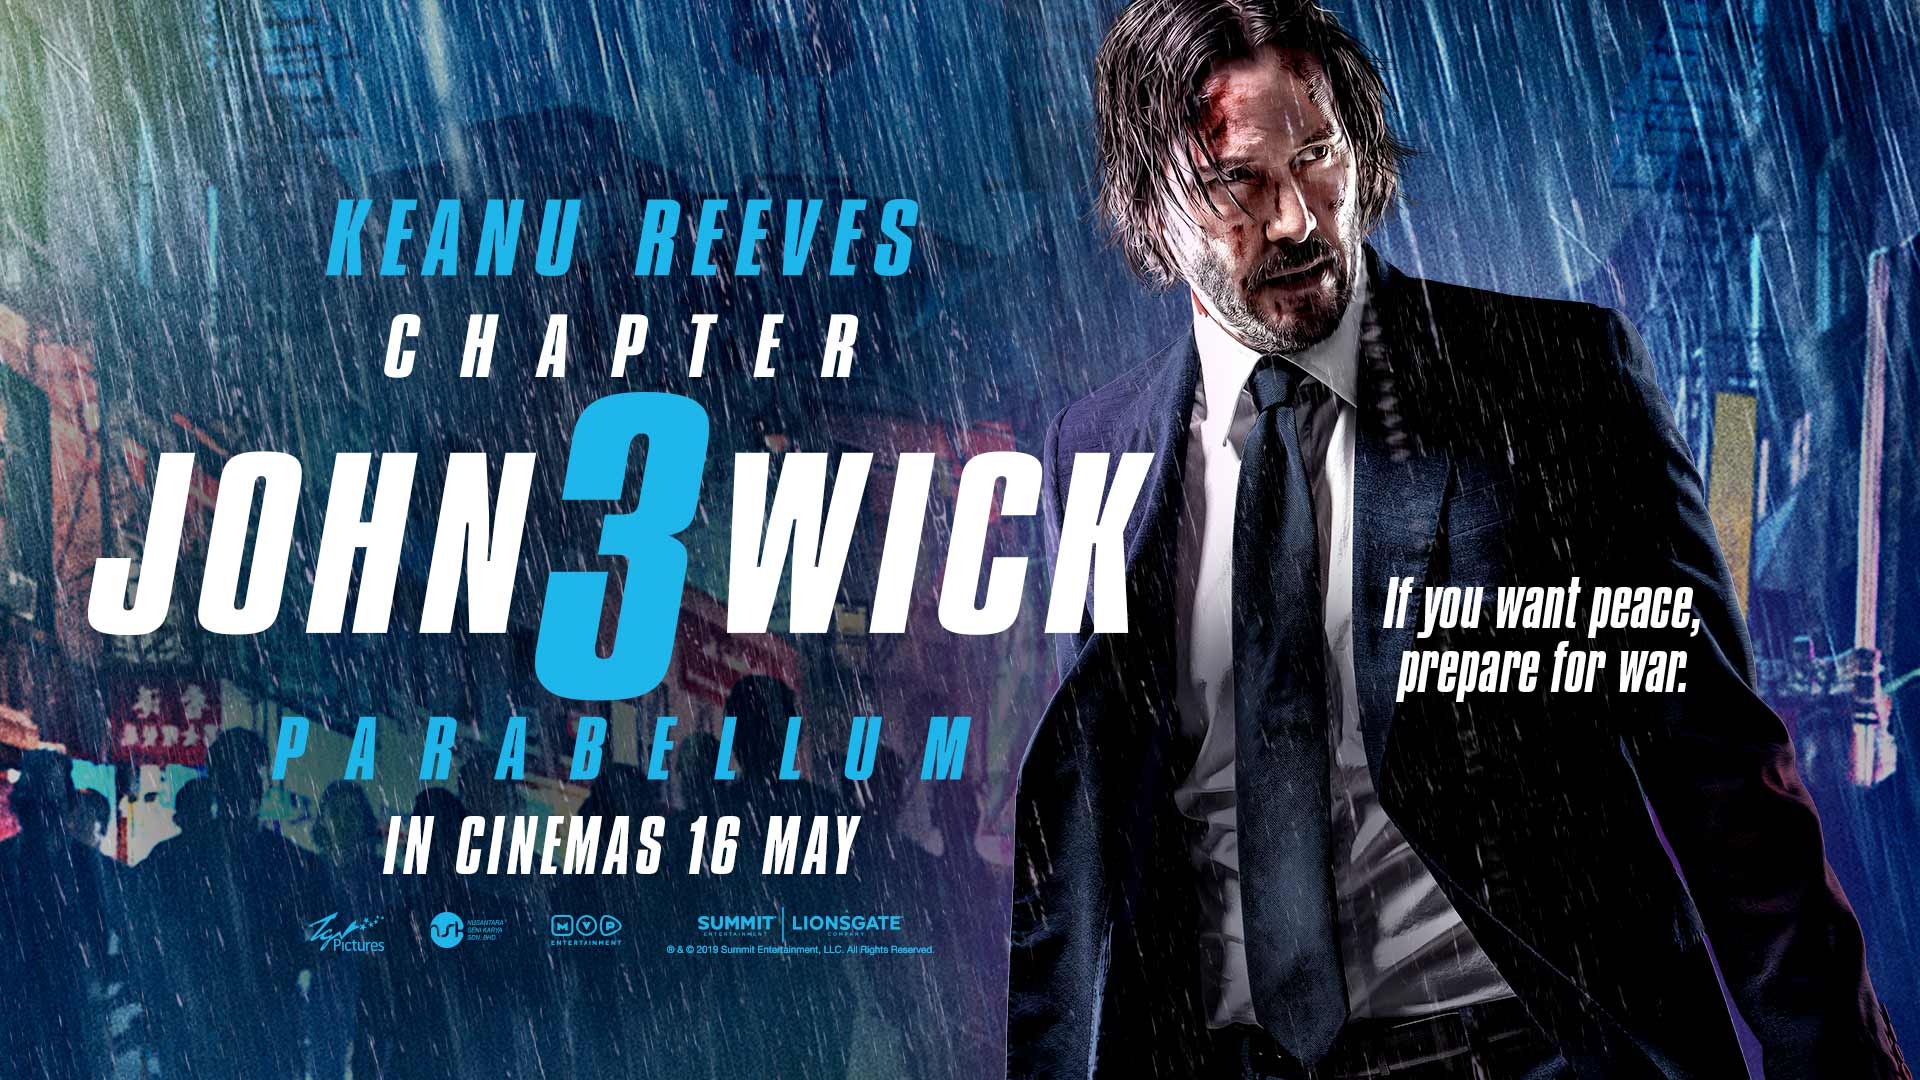 Contest: Win Premiere Passes To Watch "John Wick: Chapter ...